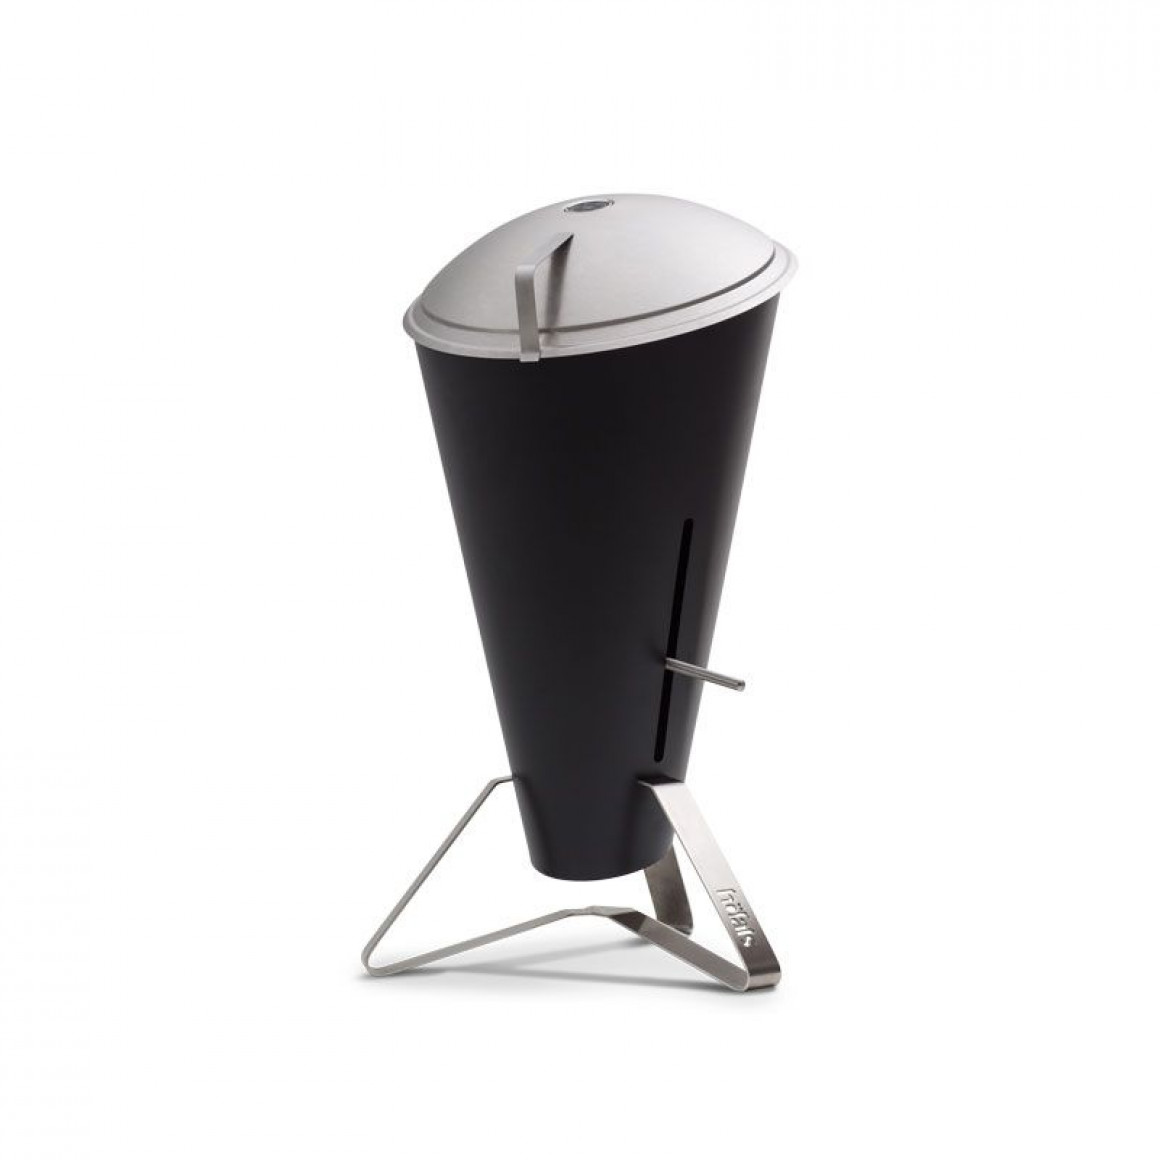 Cone charcoal grill